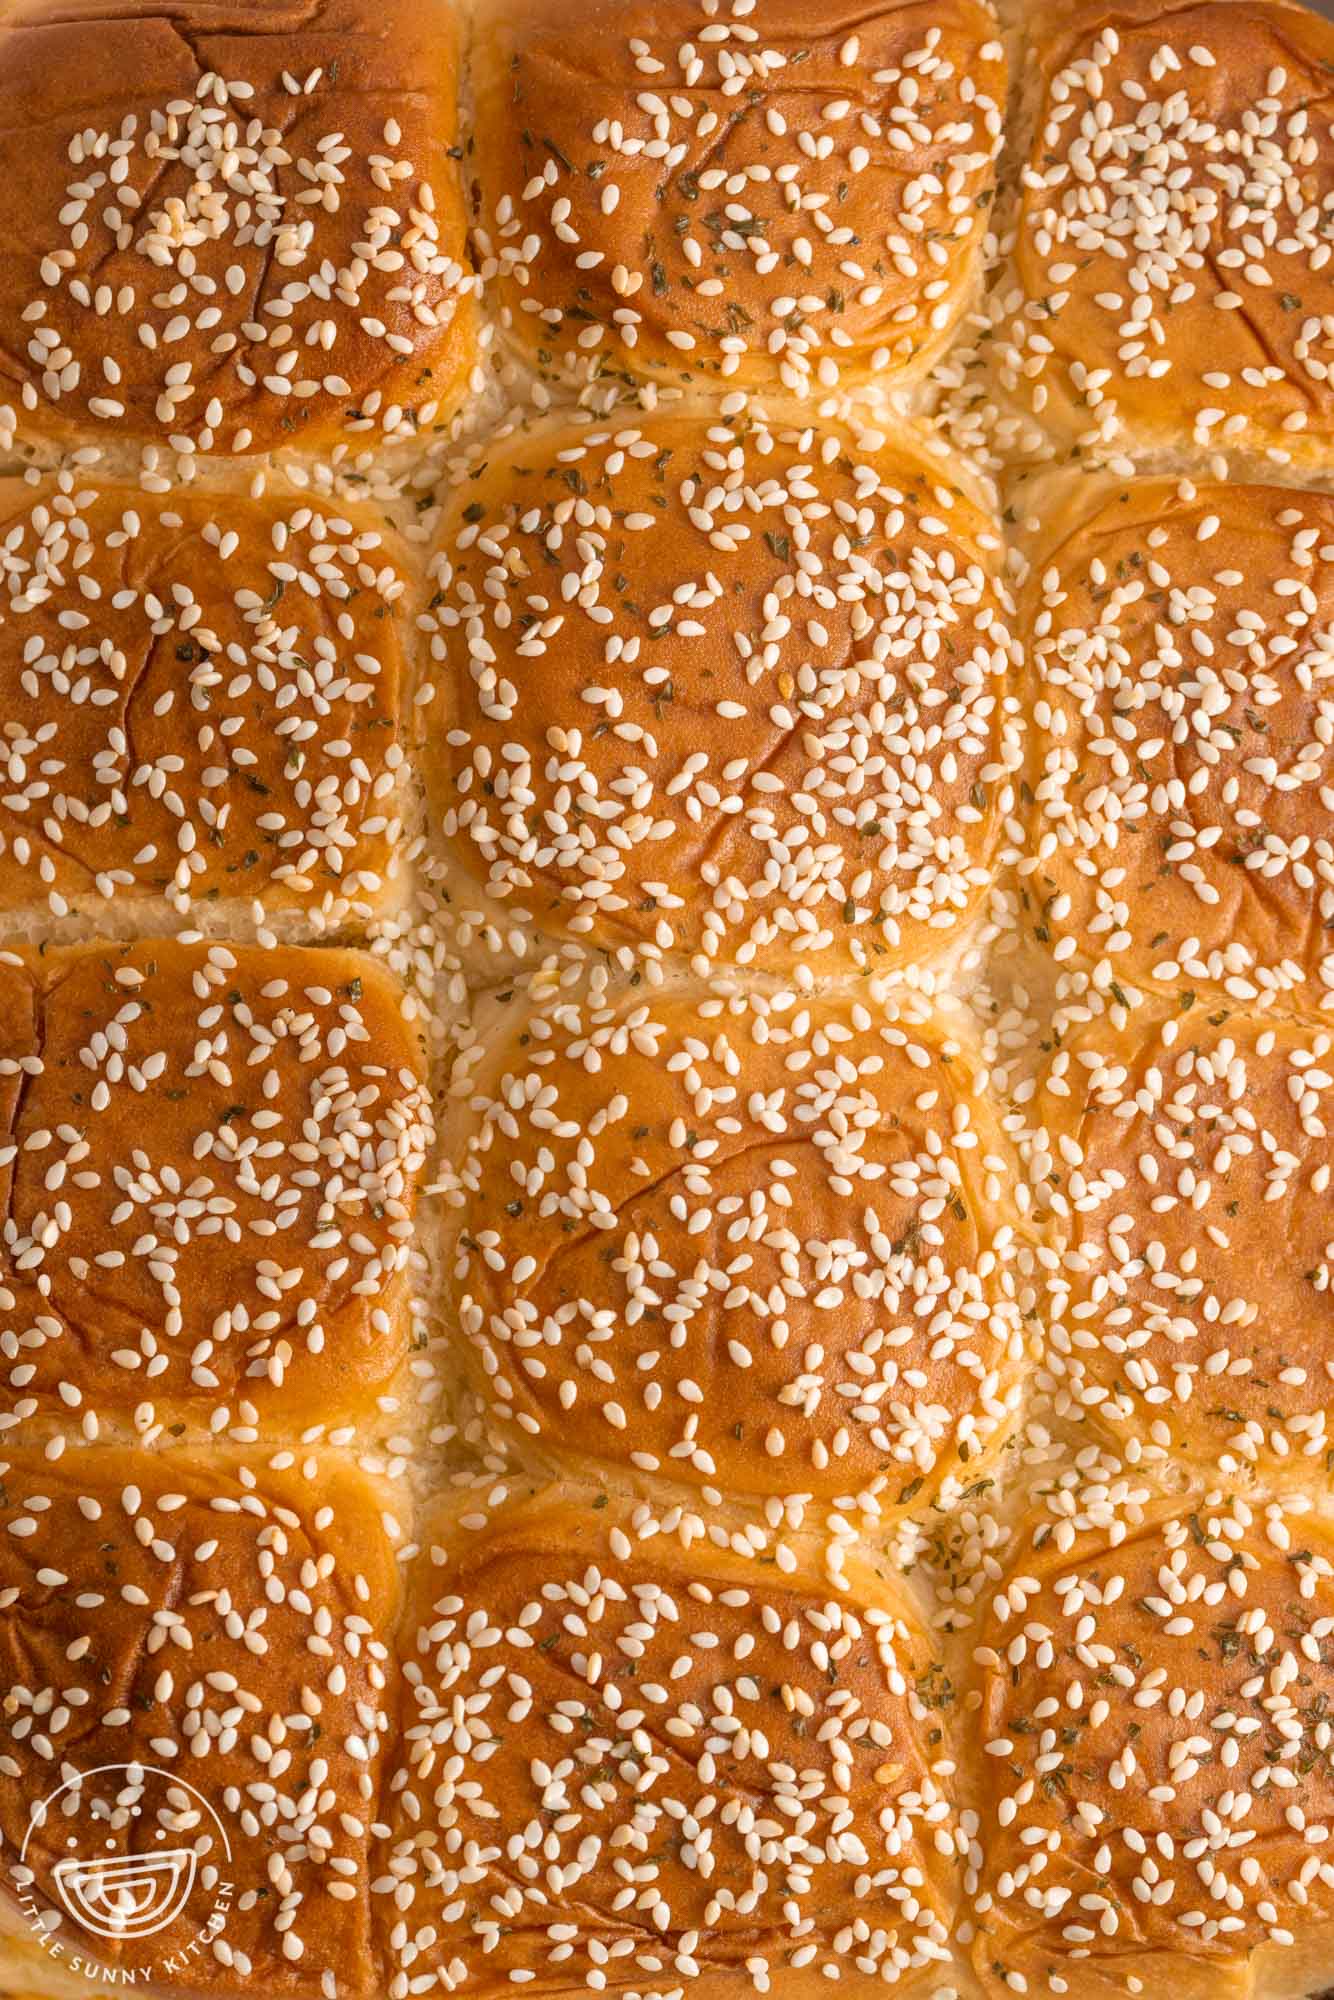 A full tray of Hawaiian rolls topped with sesame seeds for making sliders.